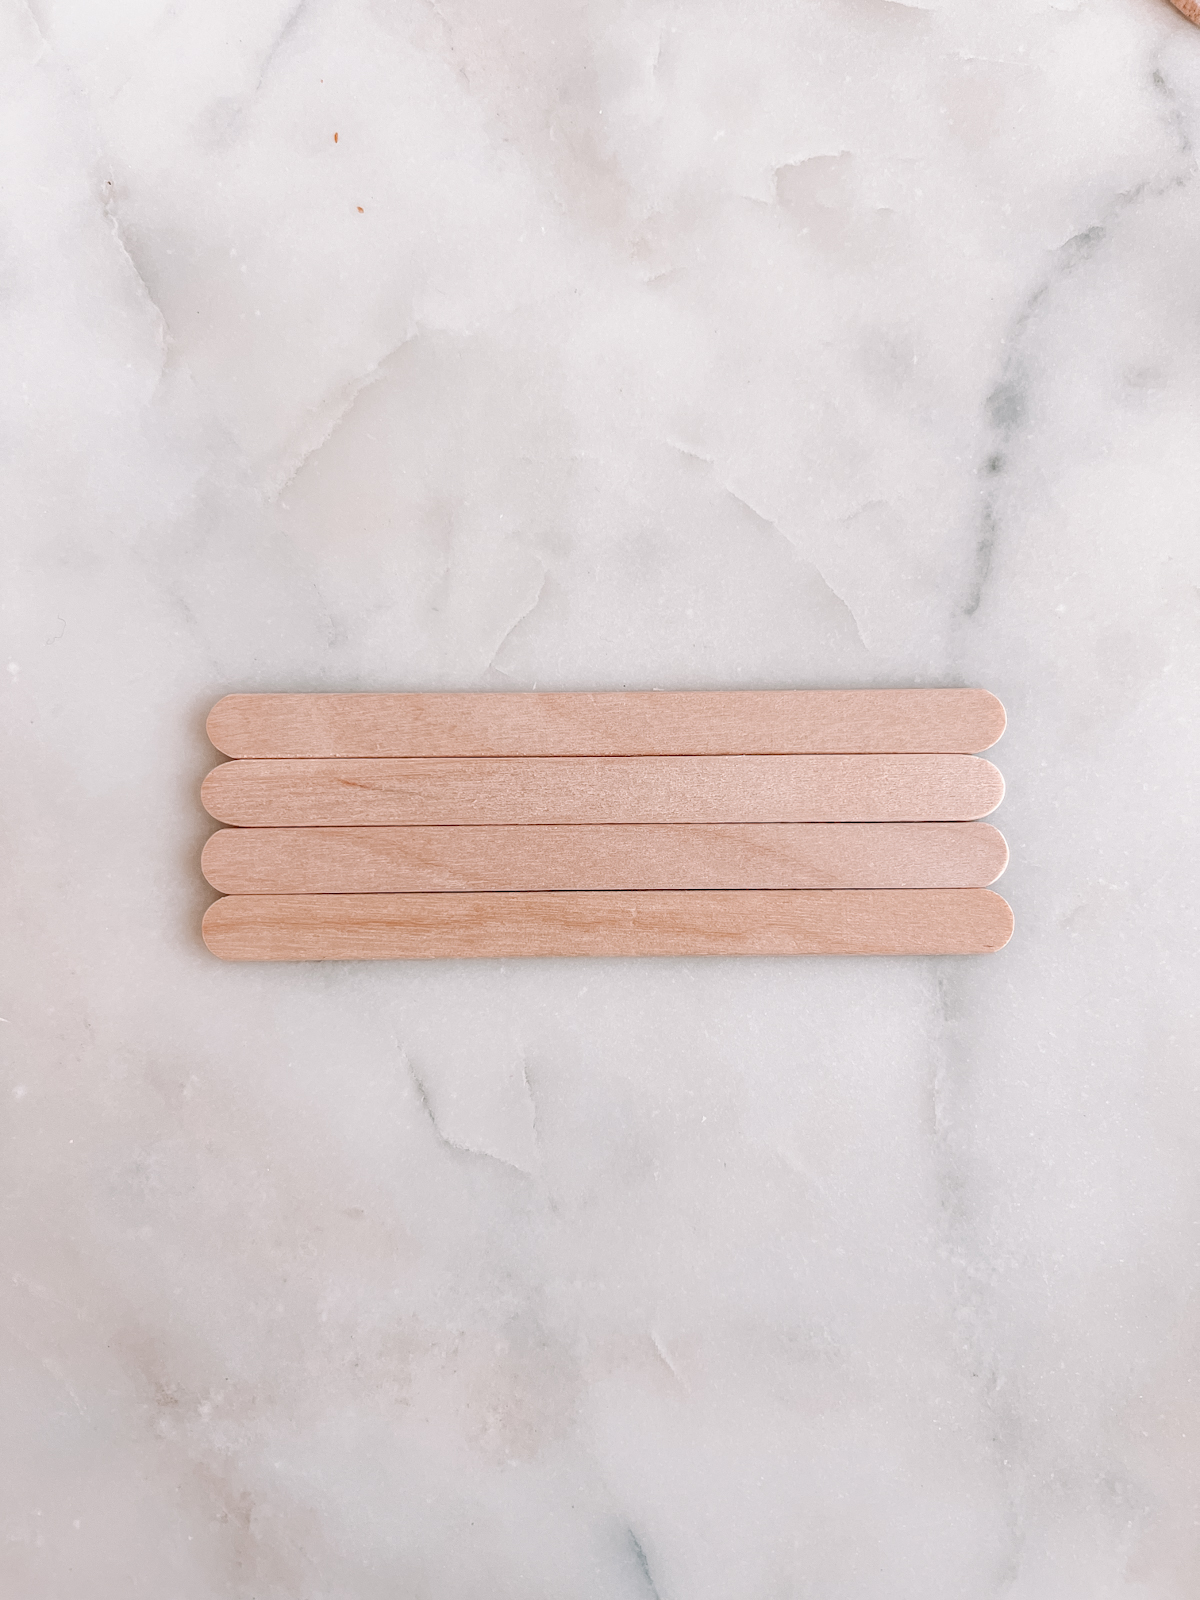 popsicle sticks on marble table